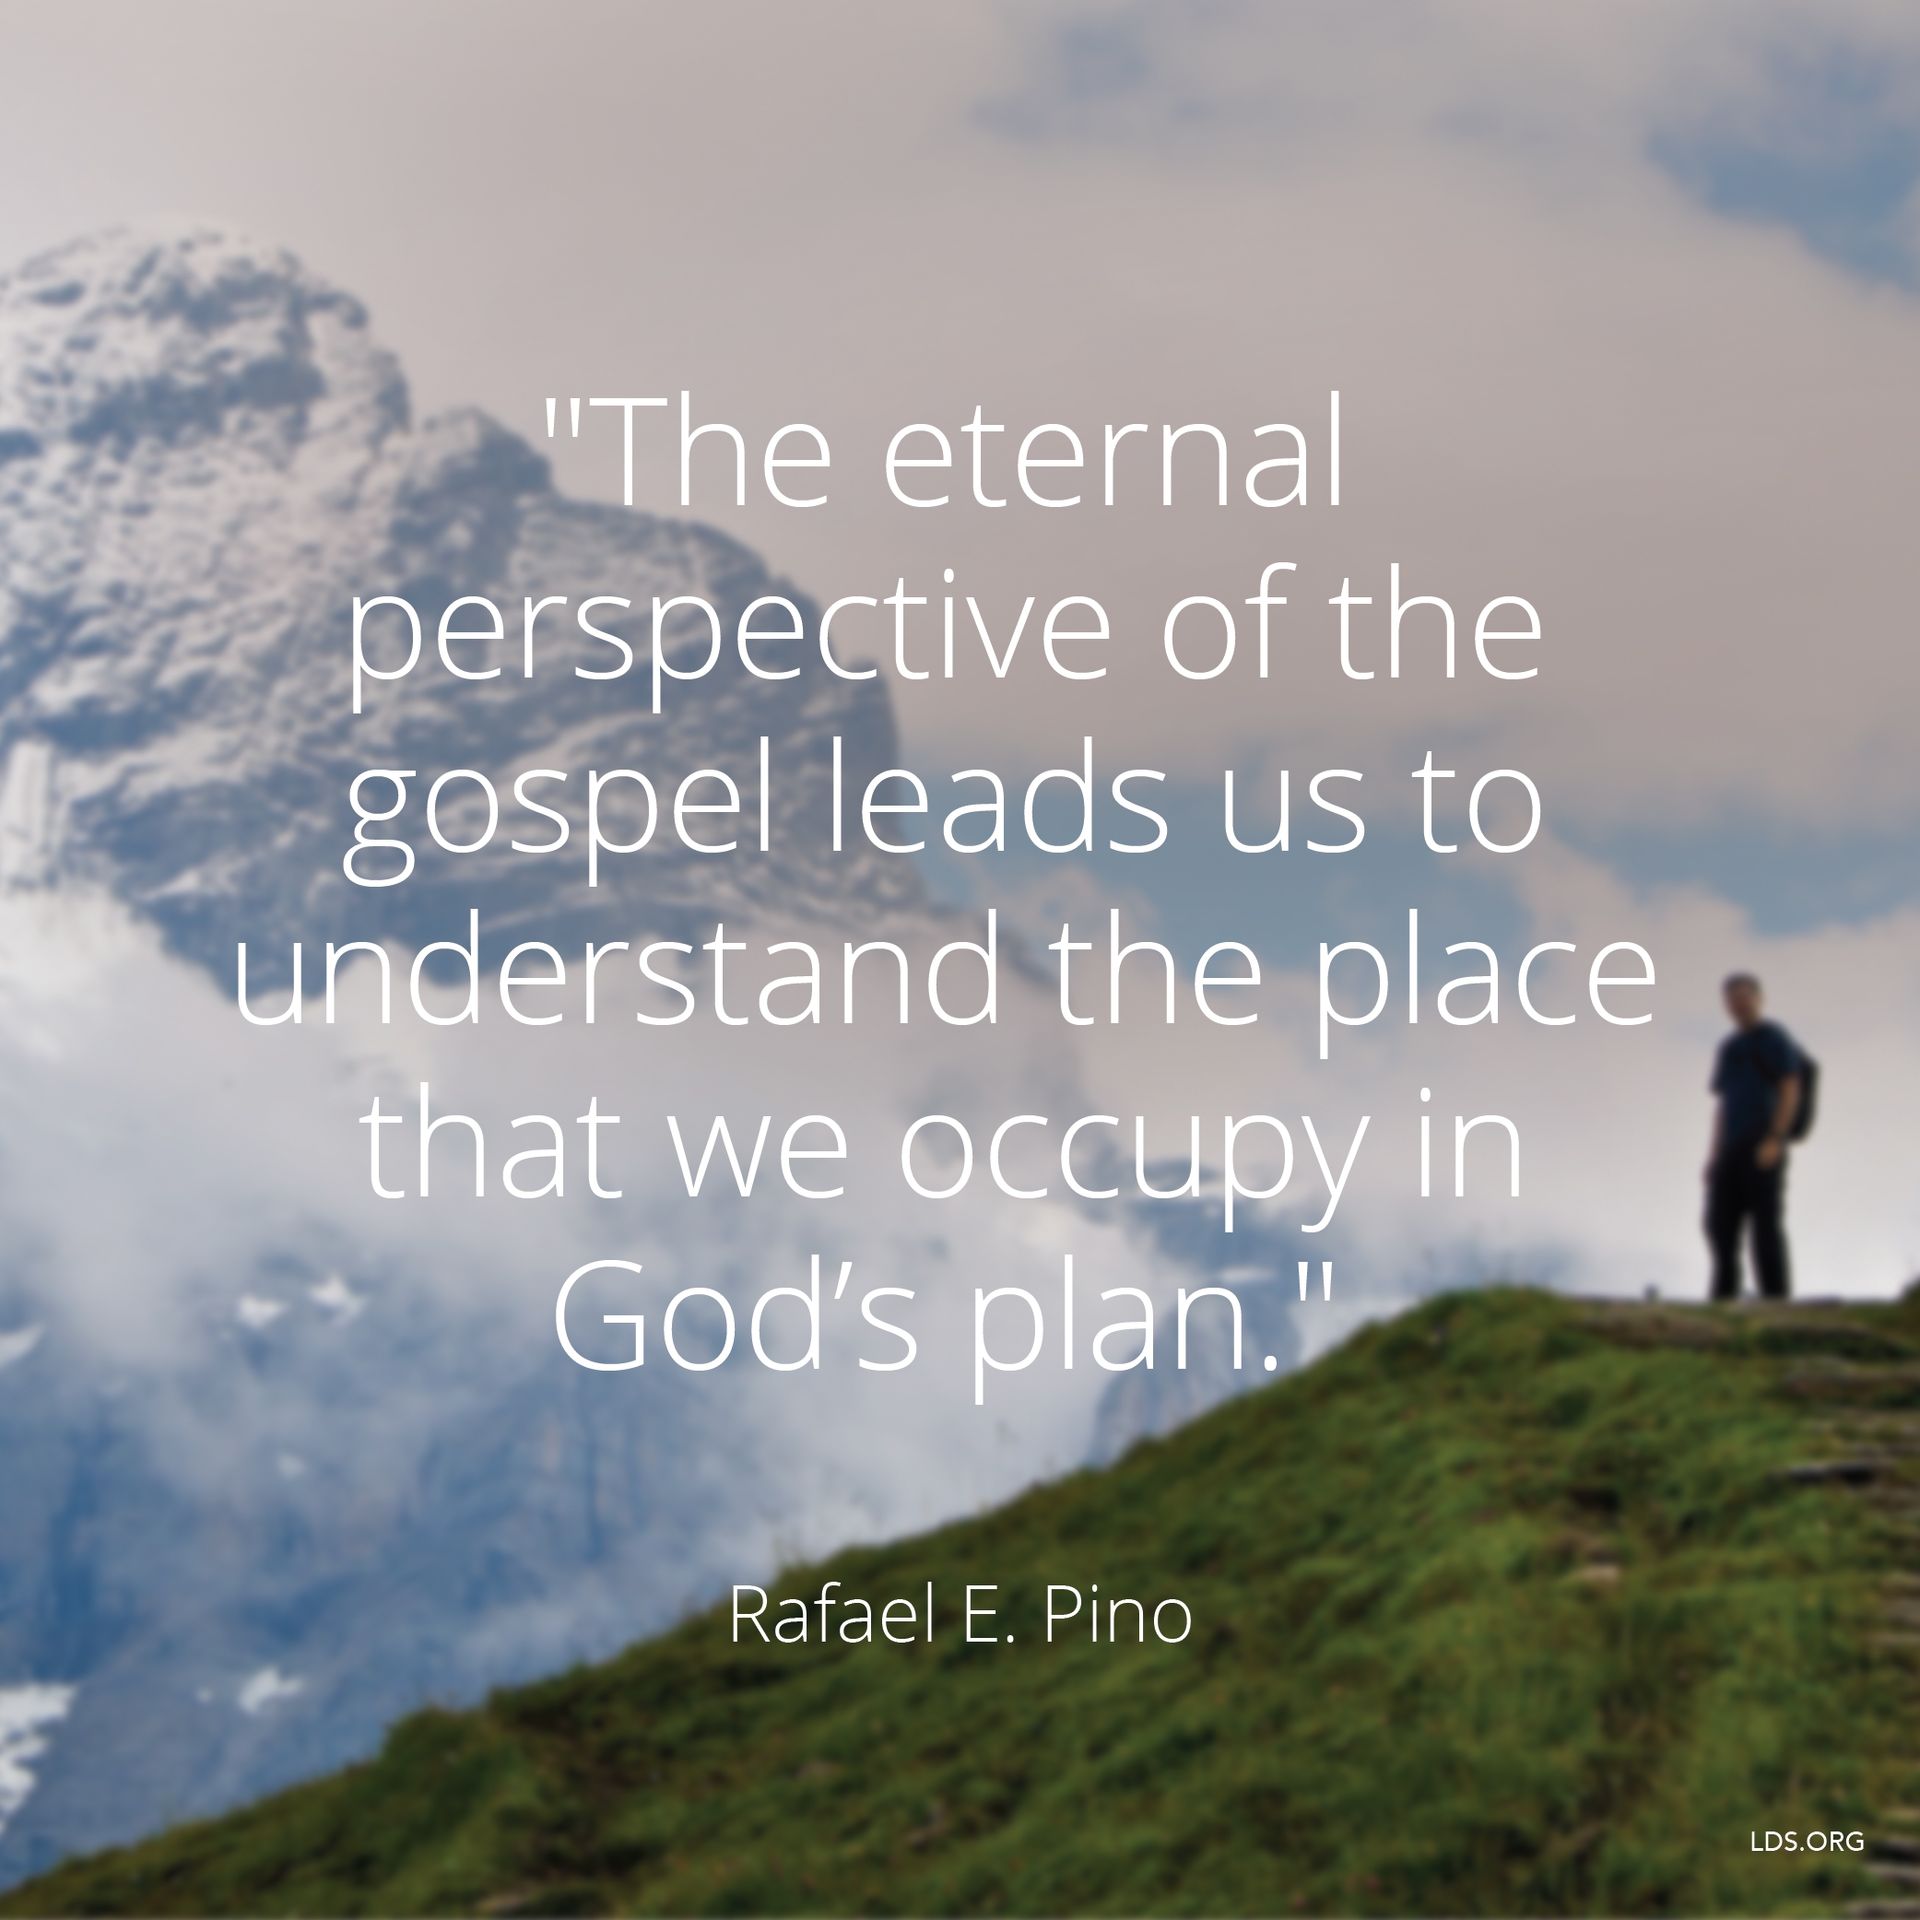 “The eternal perspective of the gospel leads us to understand the place that we occupy in God’s plan.”—Elder Rafael E. Pino, “The Eternal Perspective of the Gospel” © undefined ipCode 1.